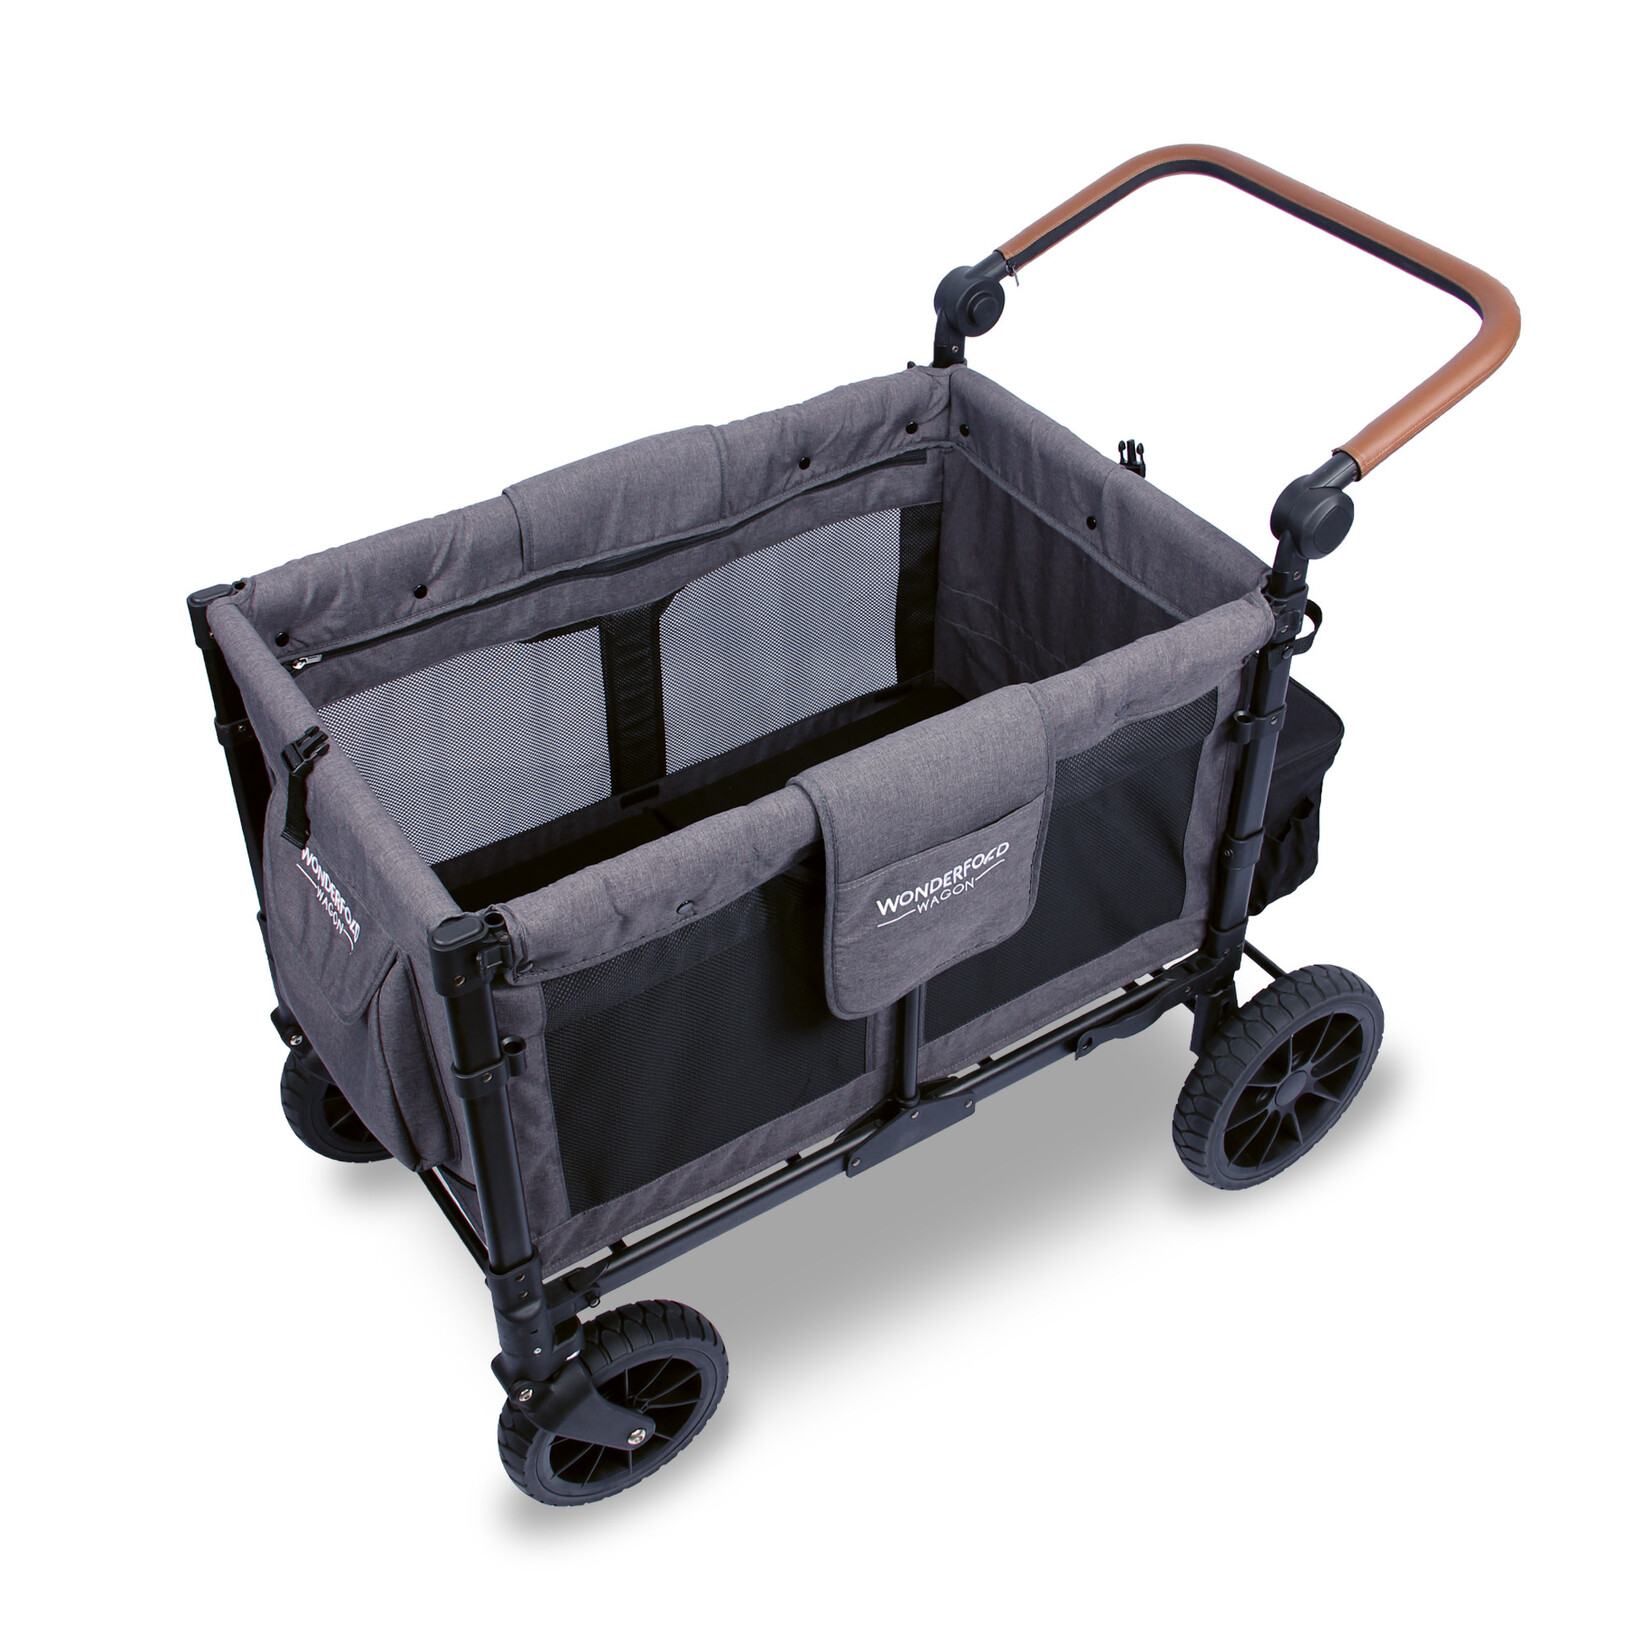 Wonderfold W4 Luxe - Quad Wagon - Charcoal Grey with Black Frame